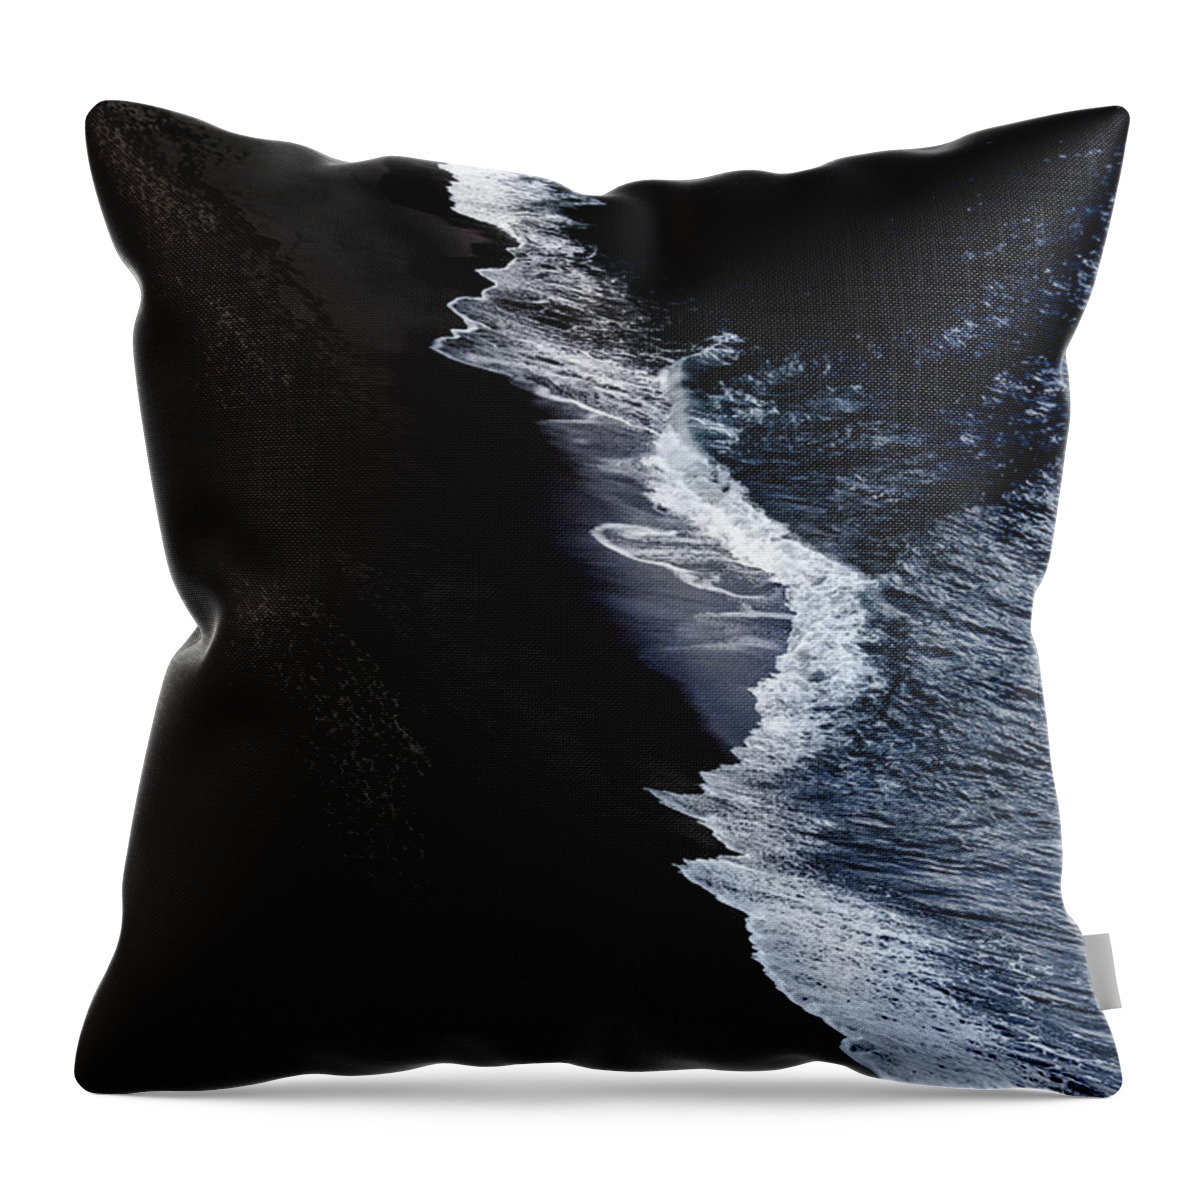 Sea Throw Pillow featuring the photograph Just White by Edgar Laureano